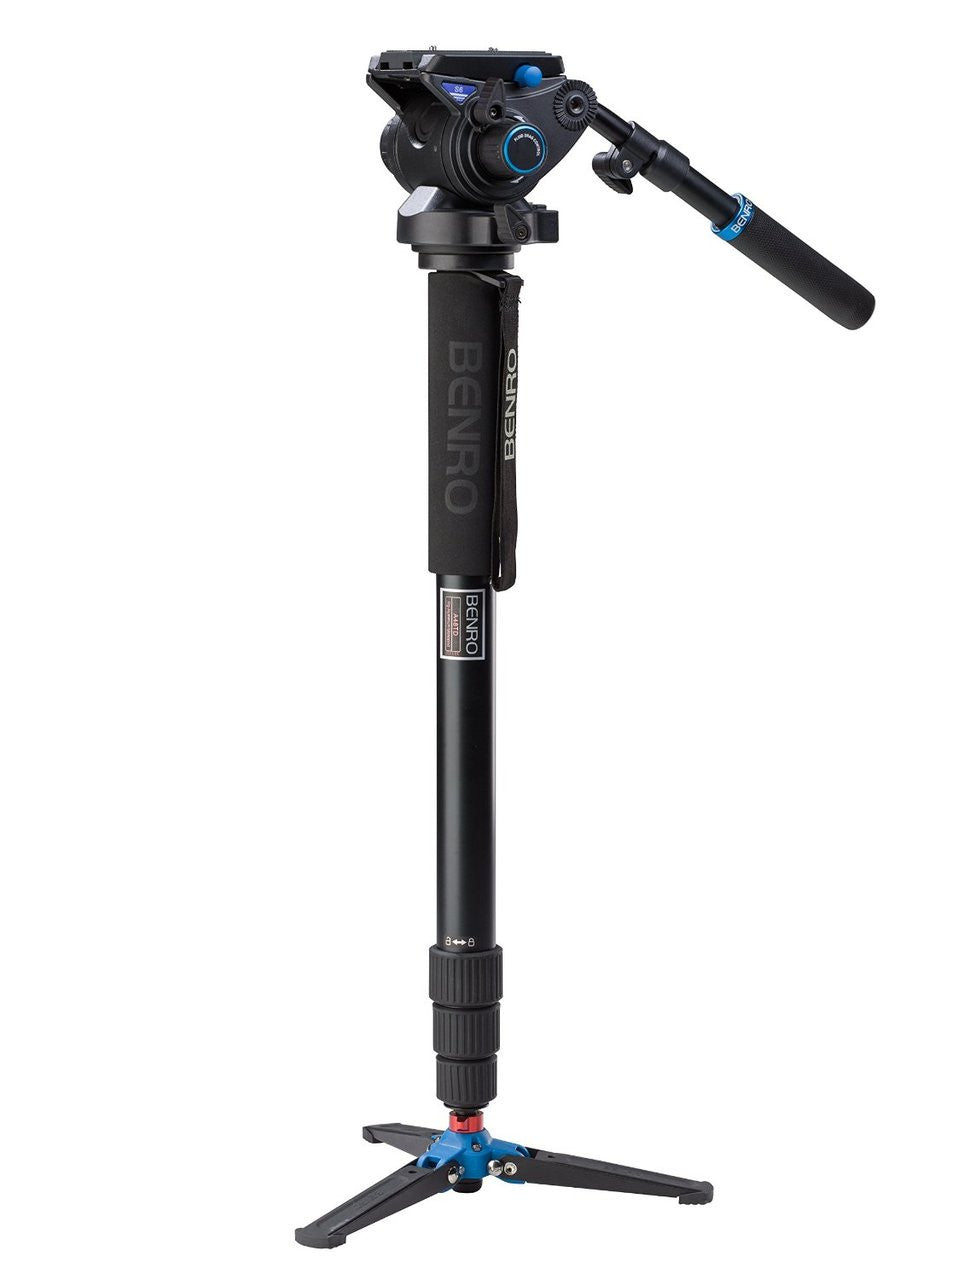 Product Image of Benro A48TDS6 Series 4 Aluminum Monopod with 3-Leg Locking Base and S6 Video Head